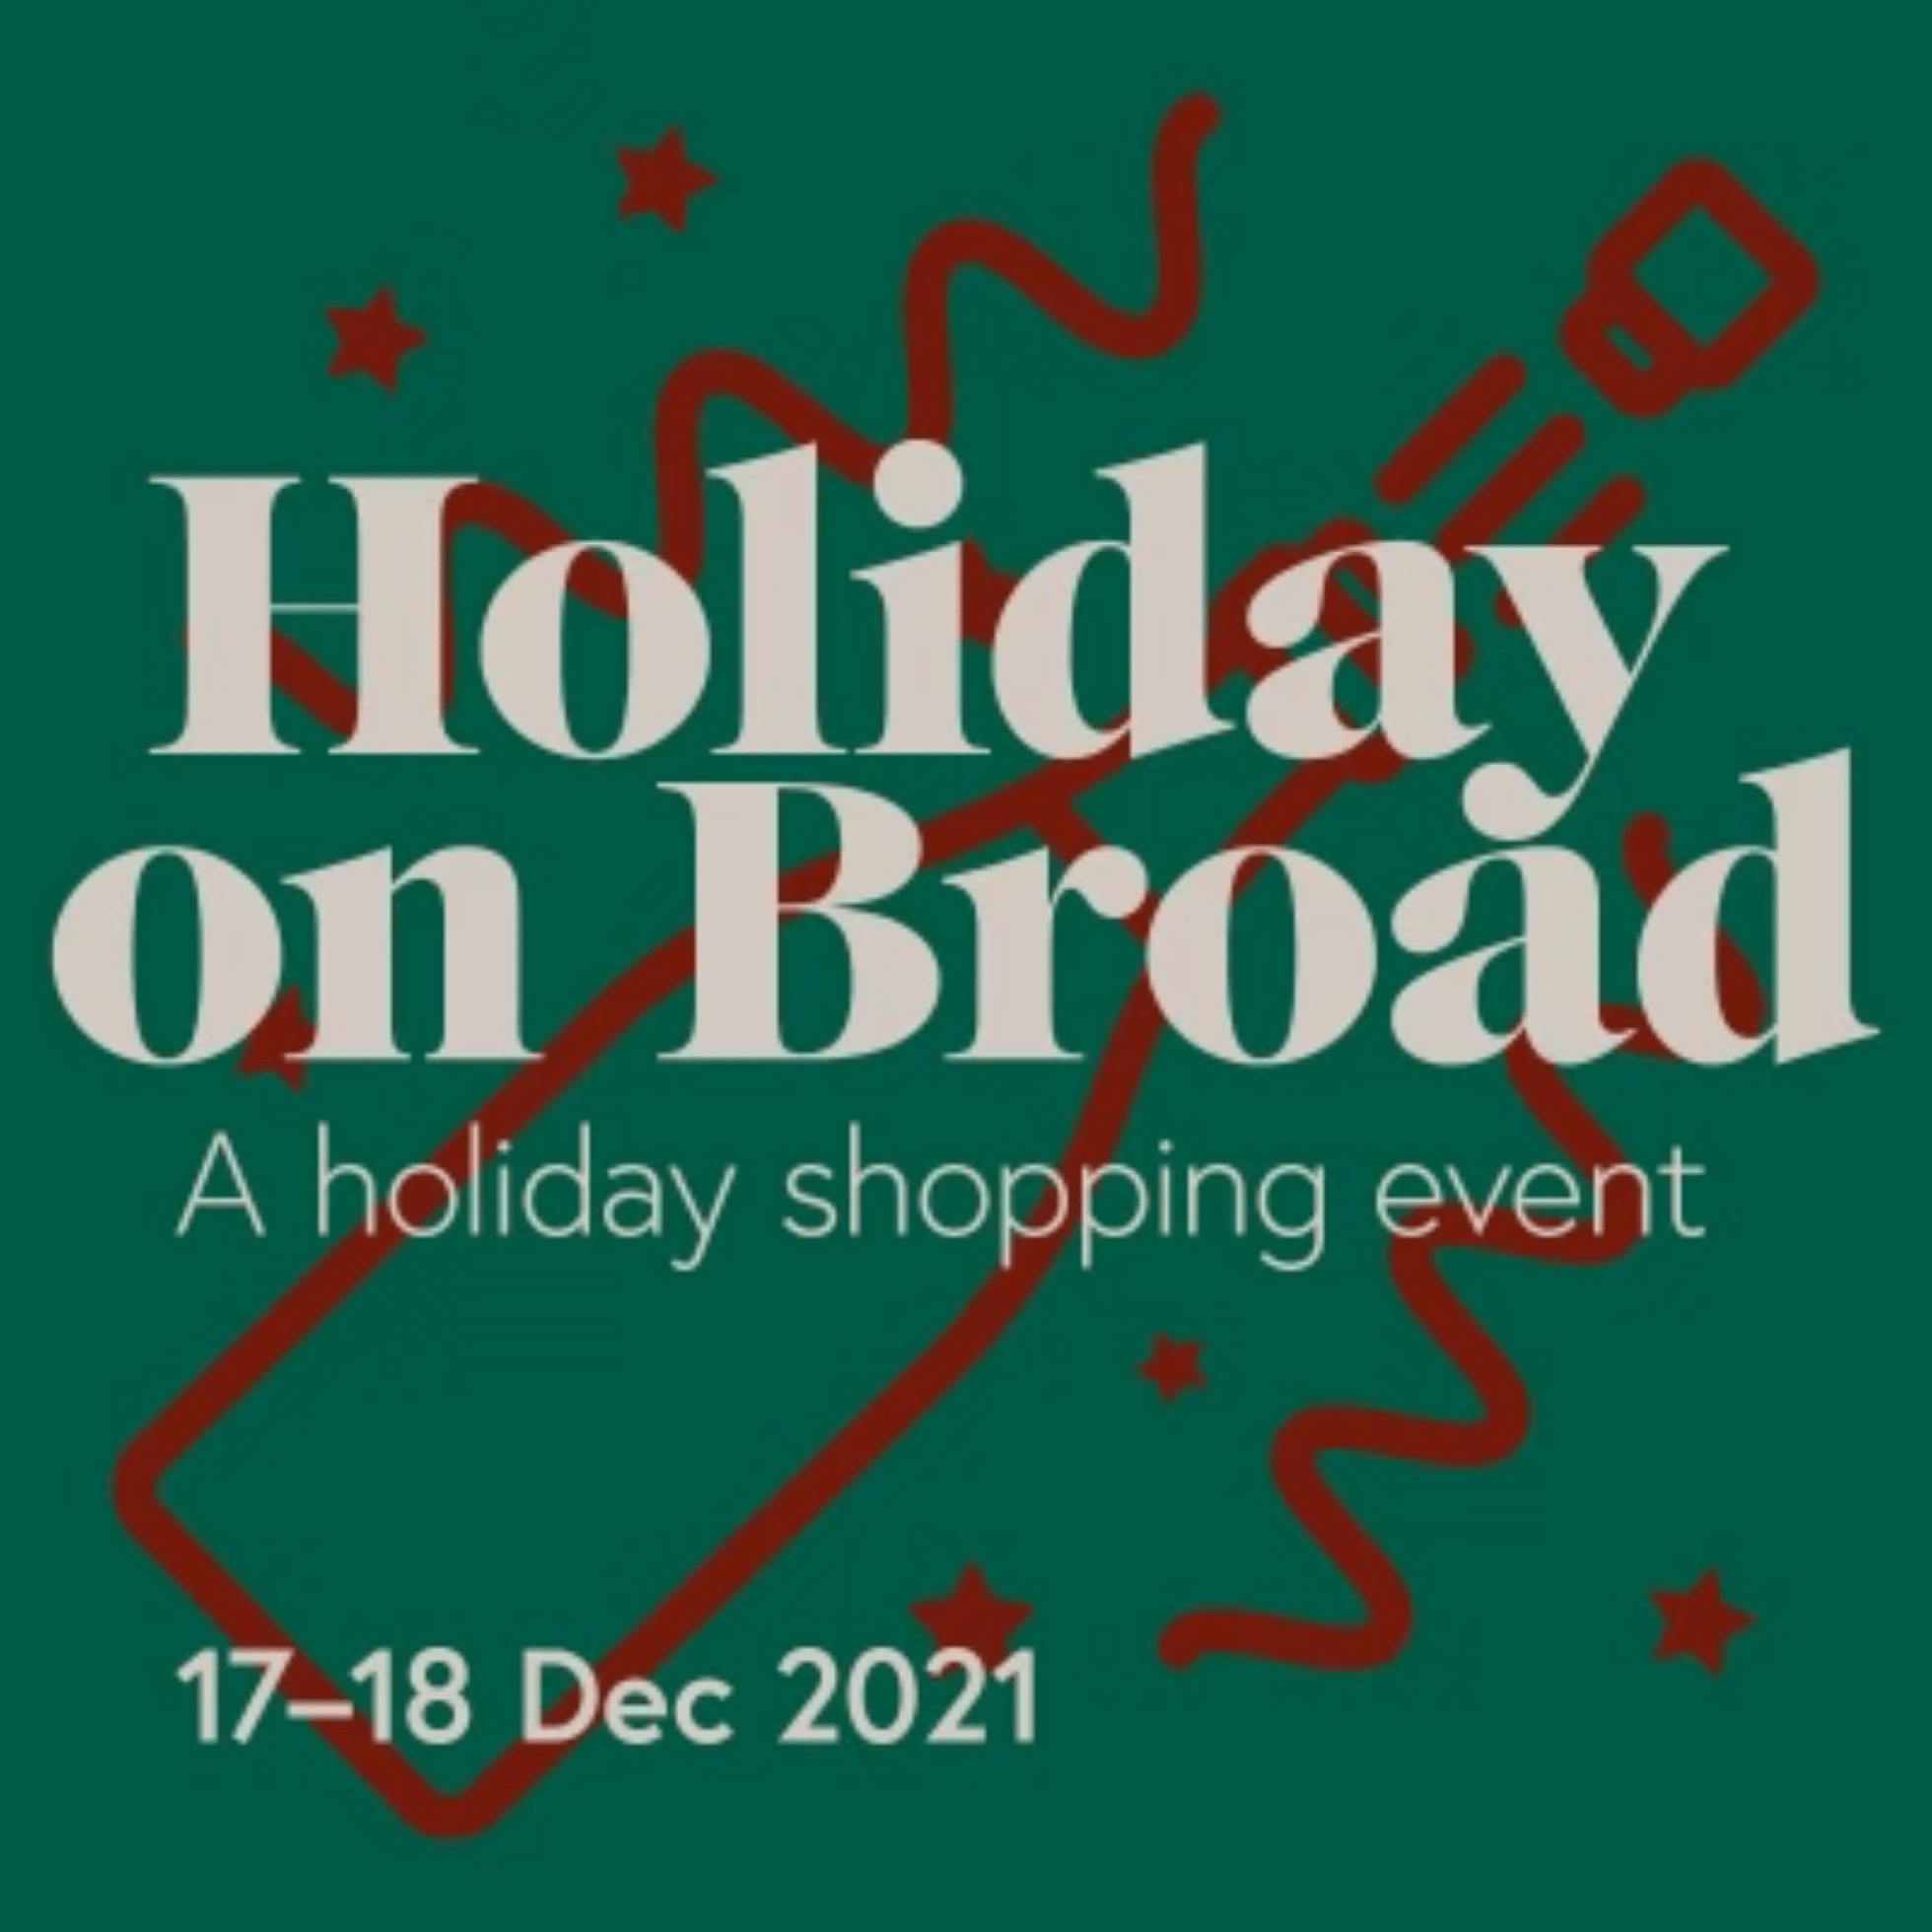 Holiday on Broad: A Holiday Shopping Event